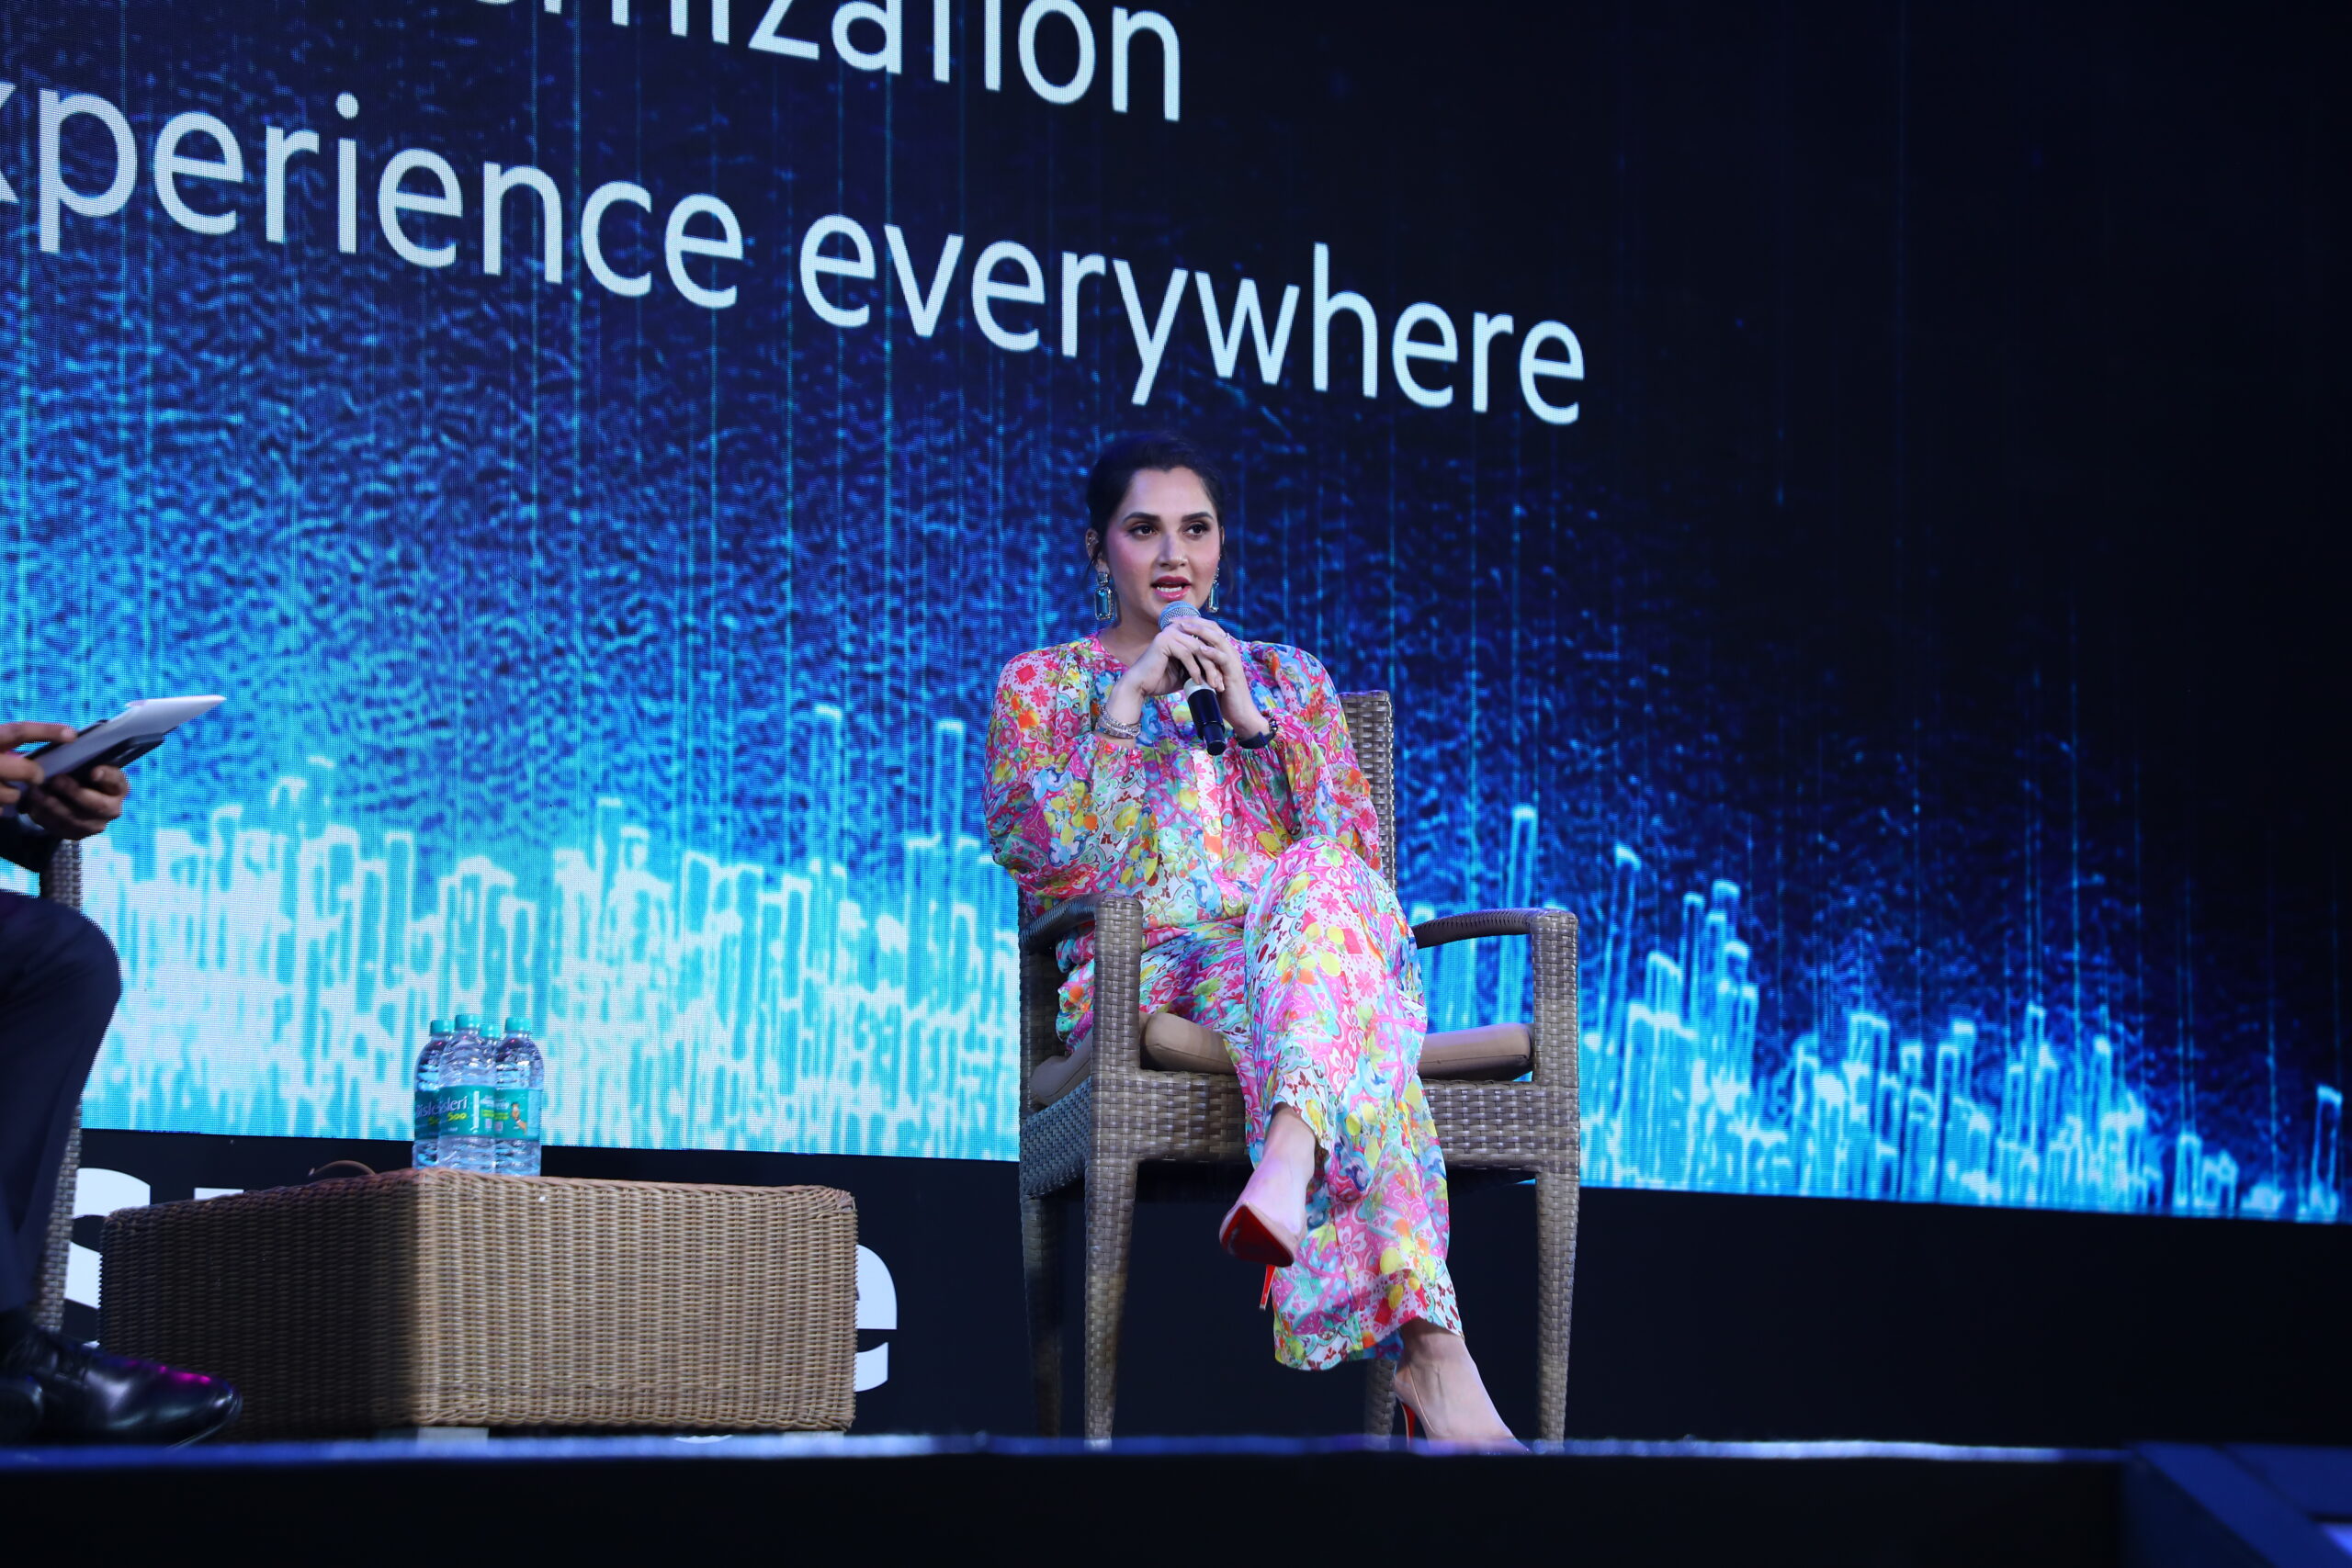 Sania Mirza as a motivational speaker at a corporate event in Kovalam